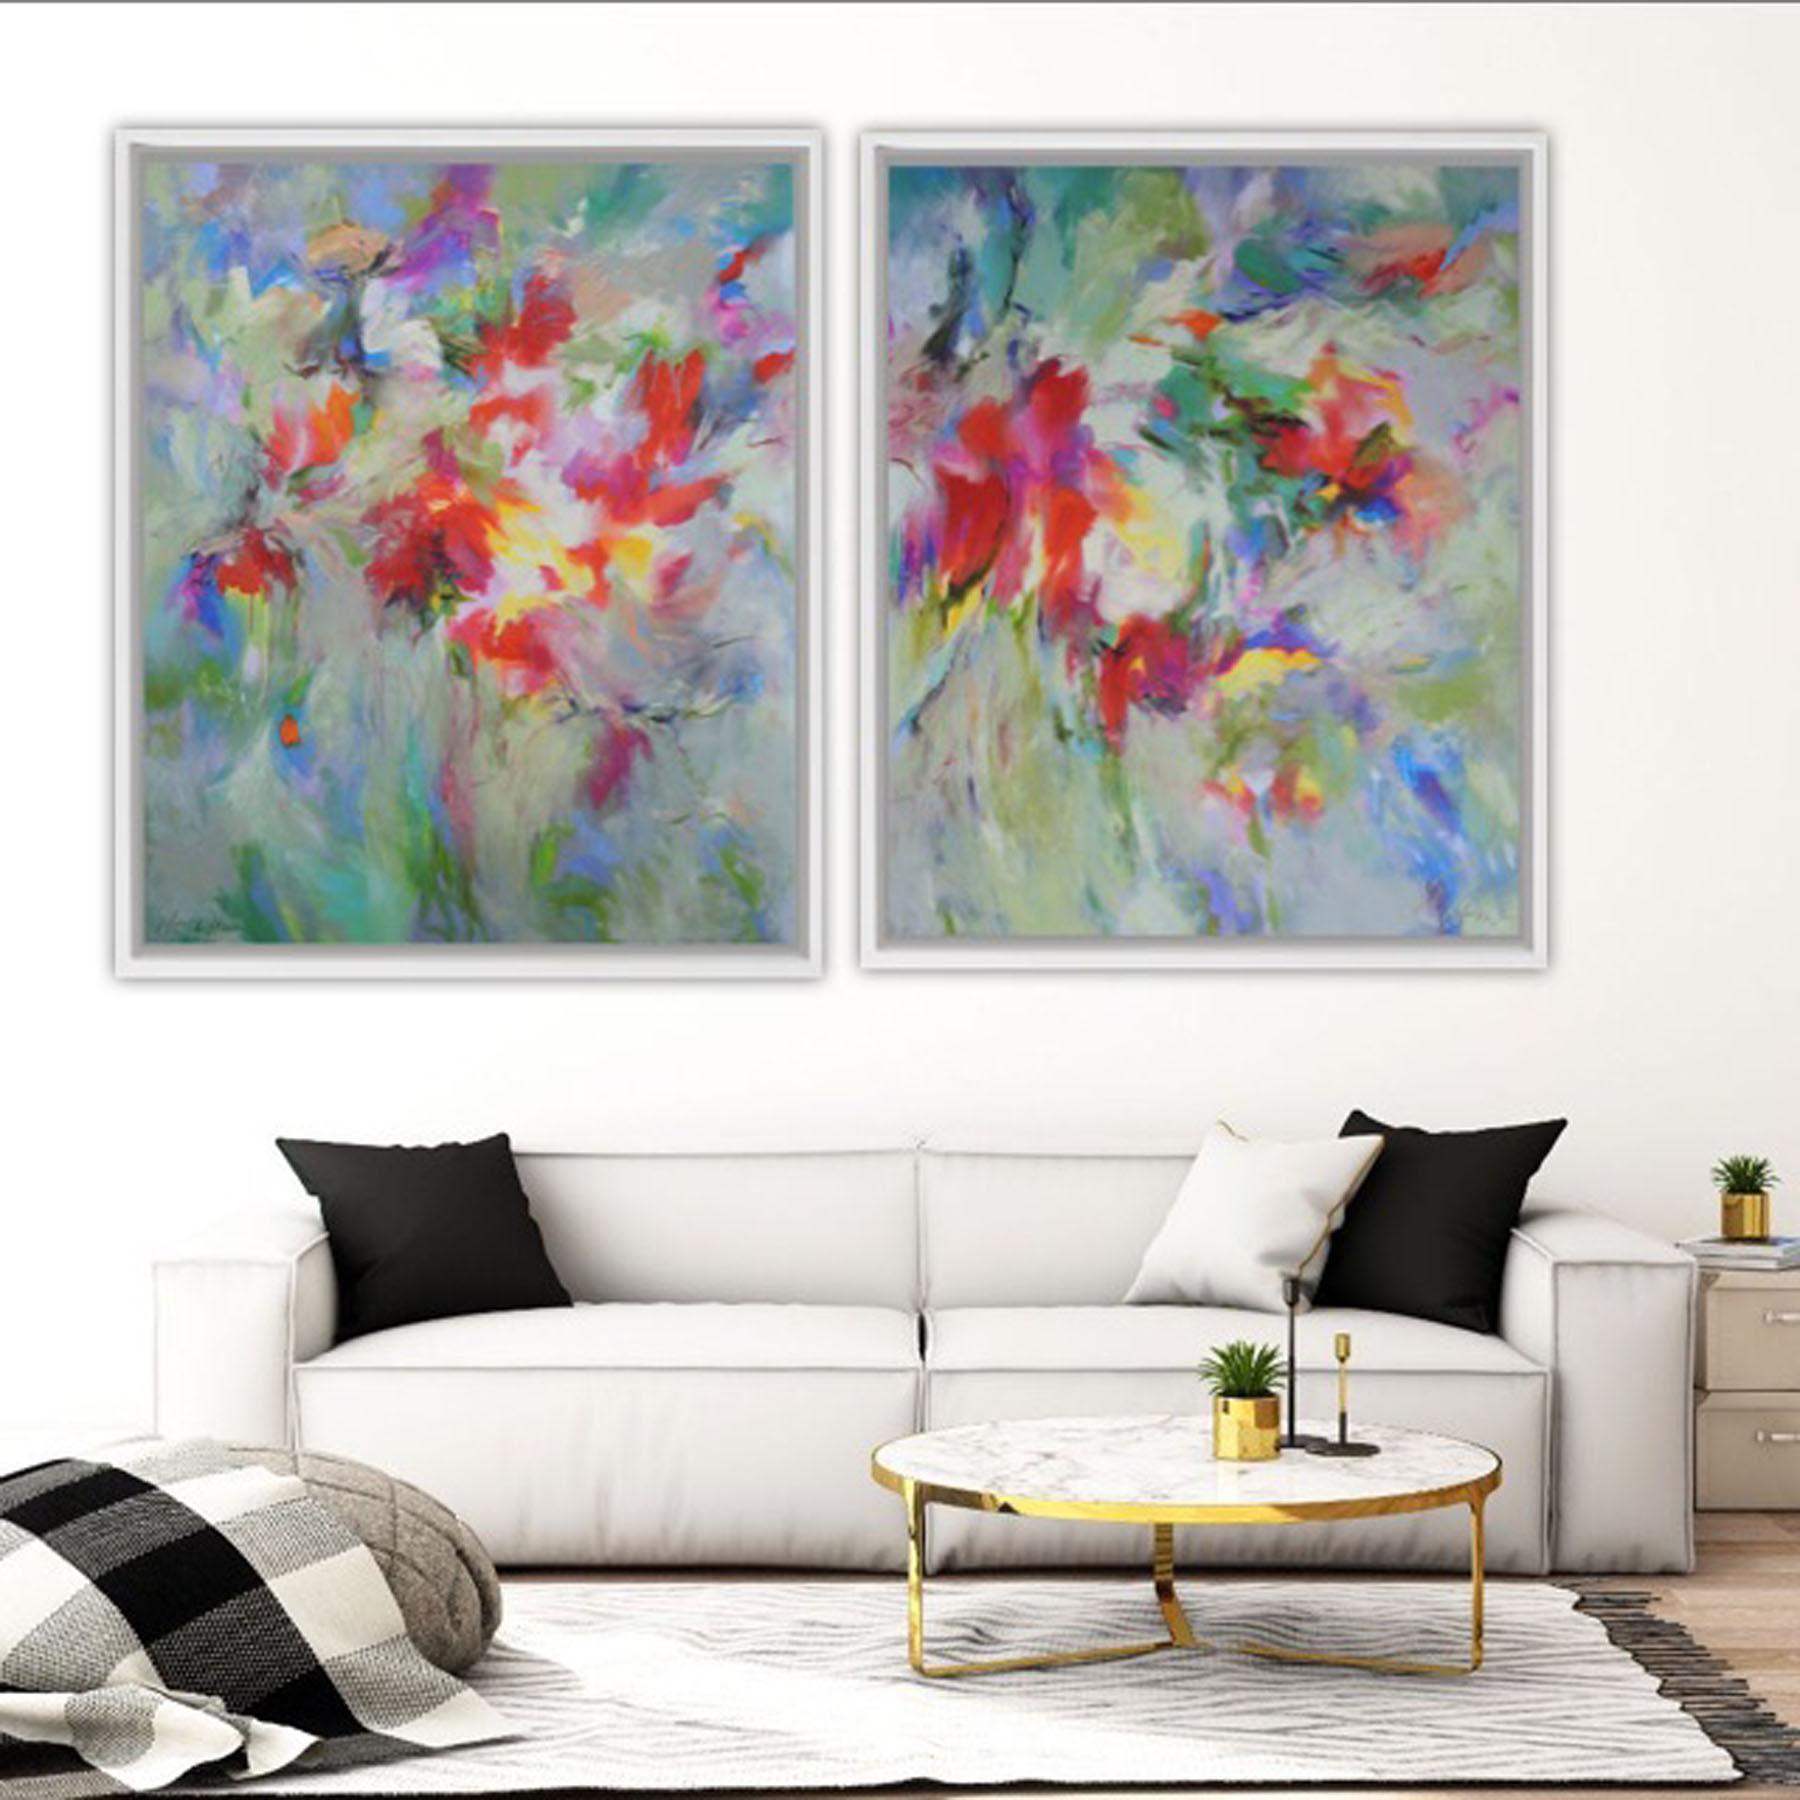 Dreamed garden BY MARY CHAPLIN, Bright Art, Abstract Landscape Painting 1